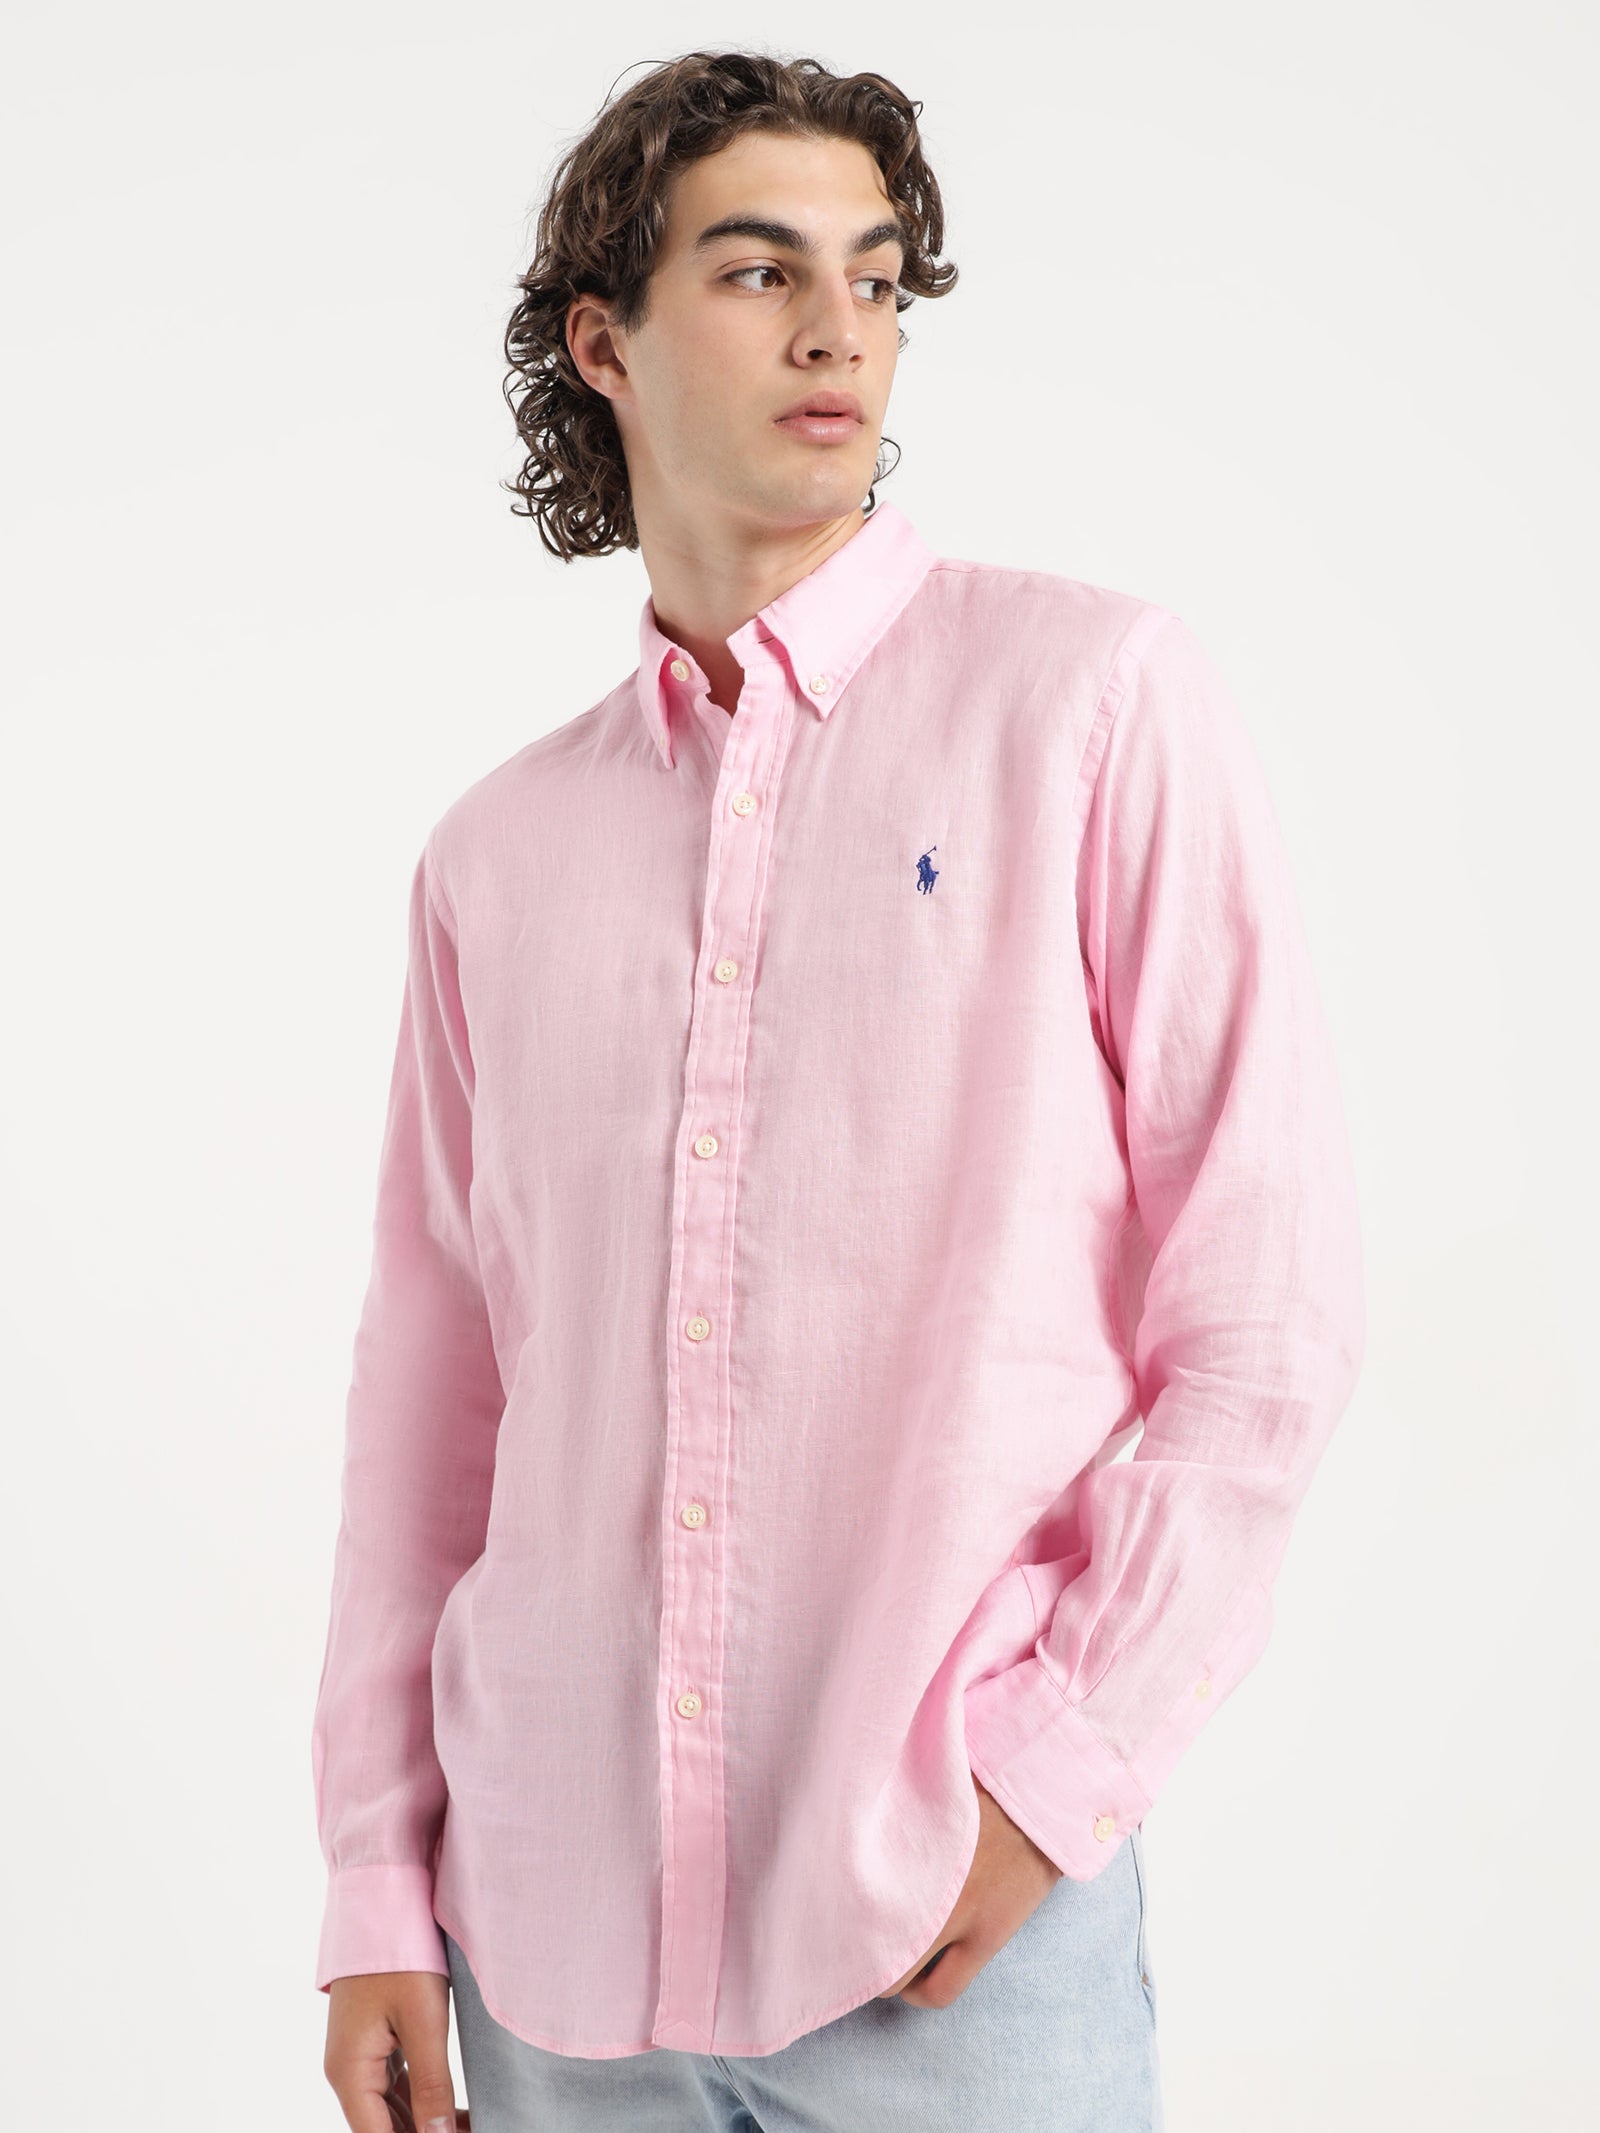 Long Sleeve Sport Button Up Shirt in Pink - Glue Store